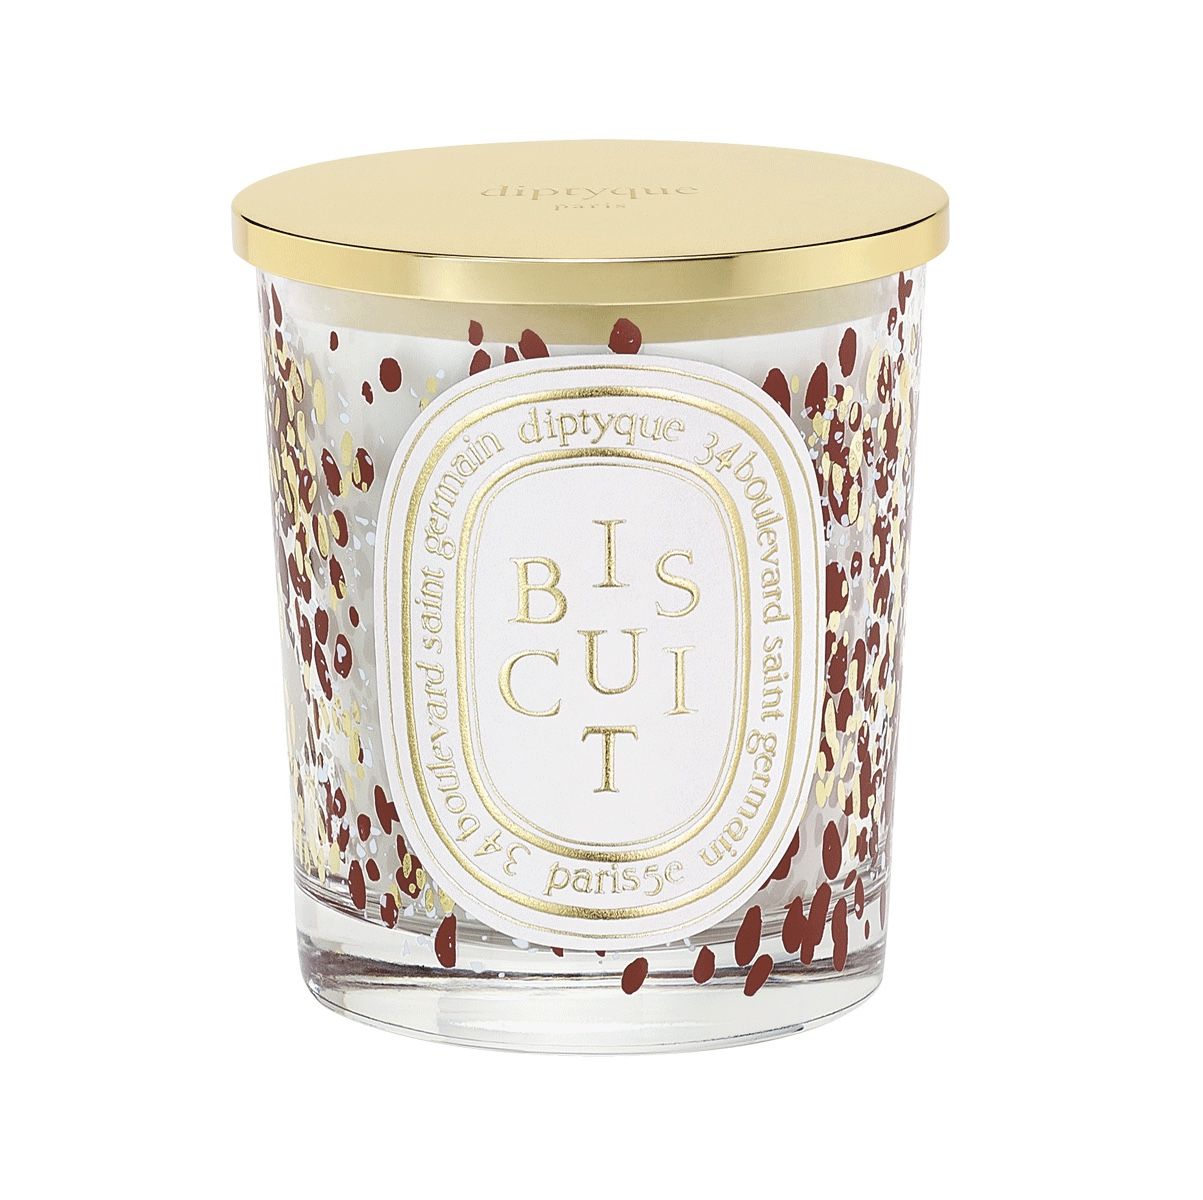 Diptyque's New Collection Will Leave Your Home Smelling Like Everything We Love About the Holidays